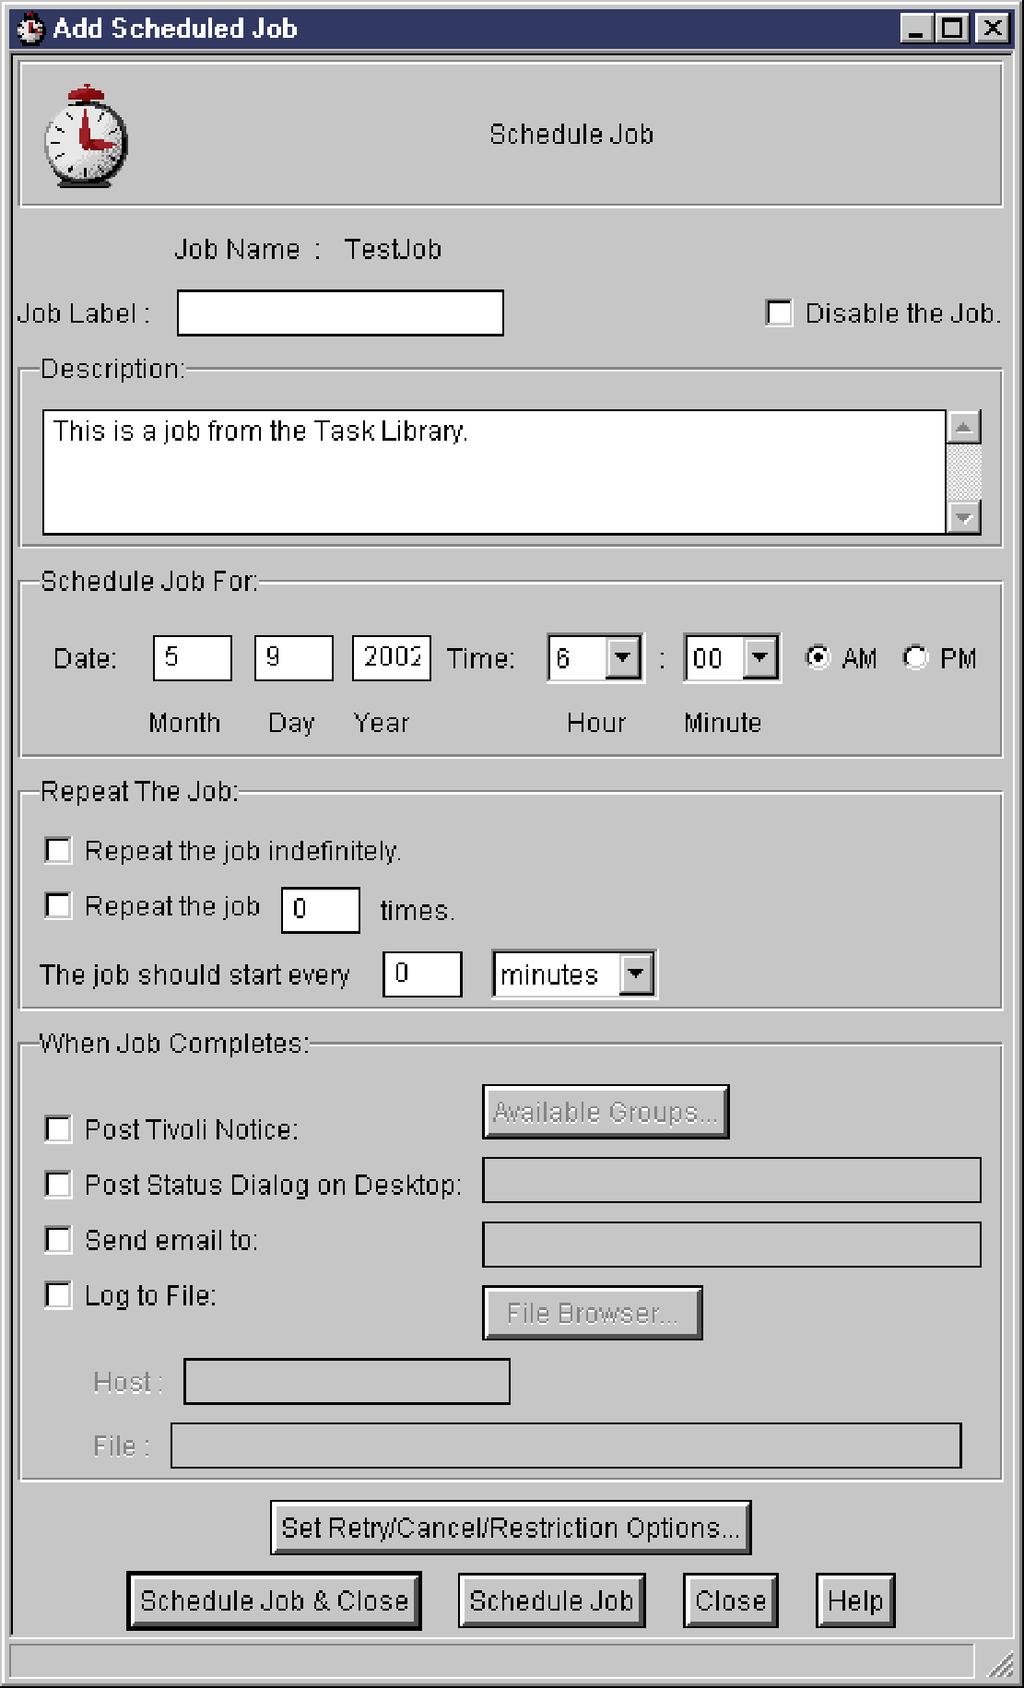 Figure 35. Add Scheduled Job dialog box 4. Type a label for the job icon in the Job Label text box of the Add Scheduled Job dialog box.